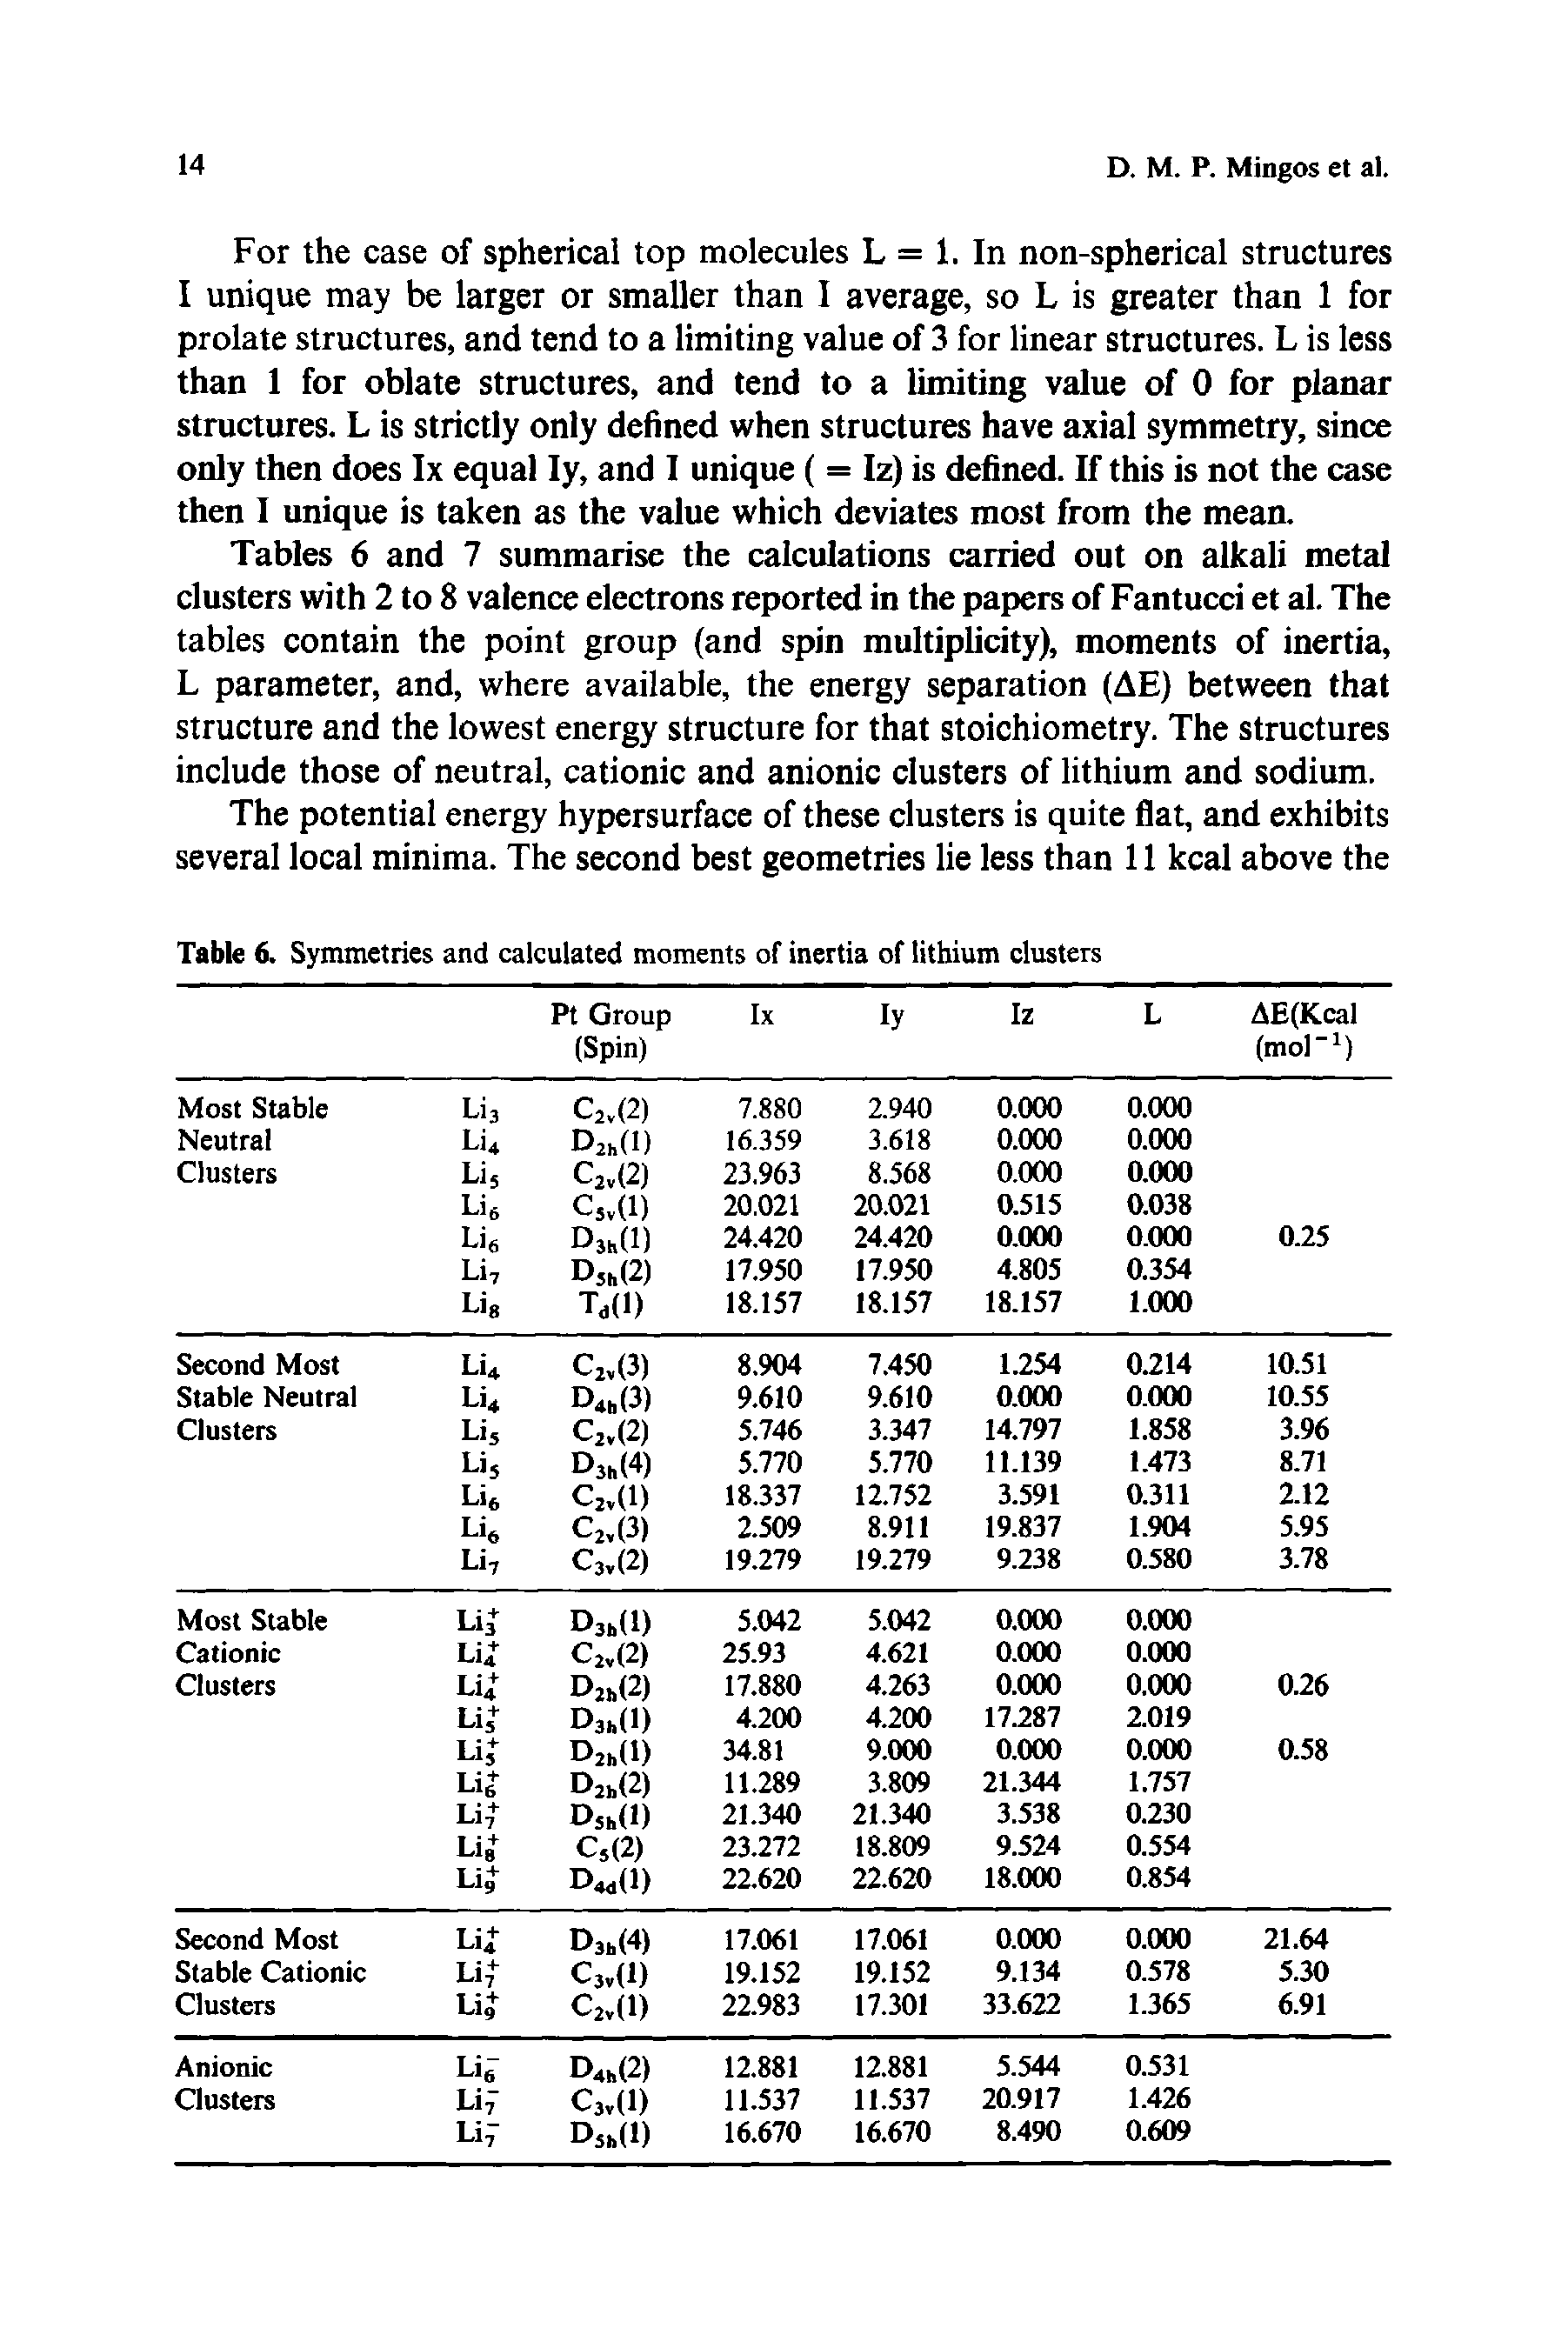 Tables 6 and 7 summarise the calculations carried out on alkali metal clusters with 2 to 8 valence electrons reported in the papers of Fantucci et al. The tables contain the point group (and spin multiplicity), moments of inertia, L parameter, and, where available, the energy separation (AE) between that structure and the lowest energy structure for that stoichiometry. The structures include those of neutral, cationic and anionic clusters of lithium and sodium.